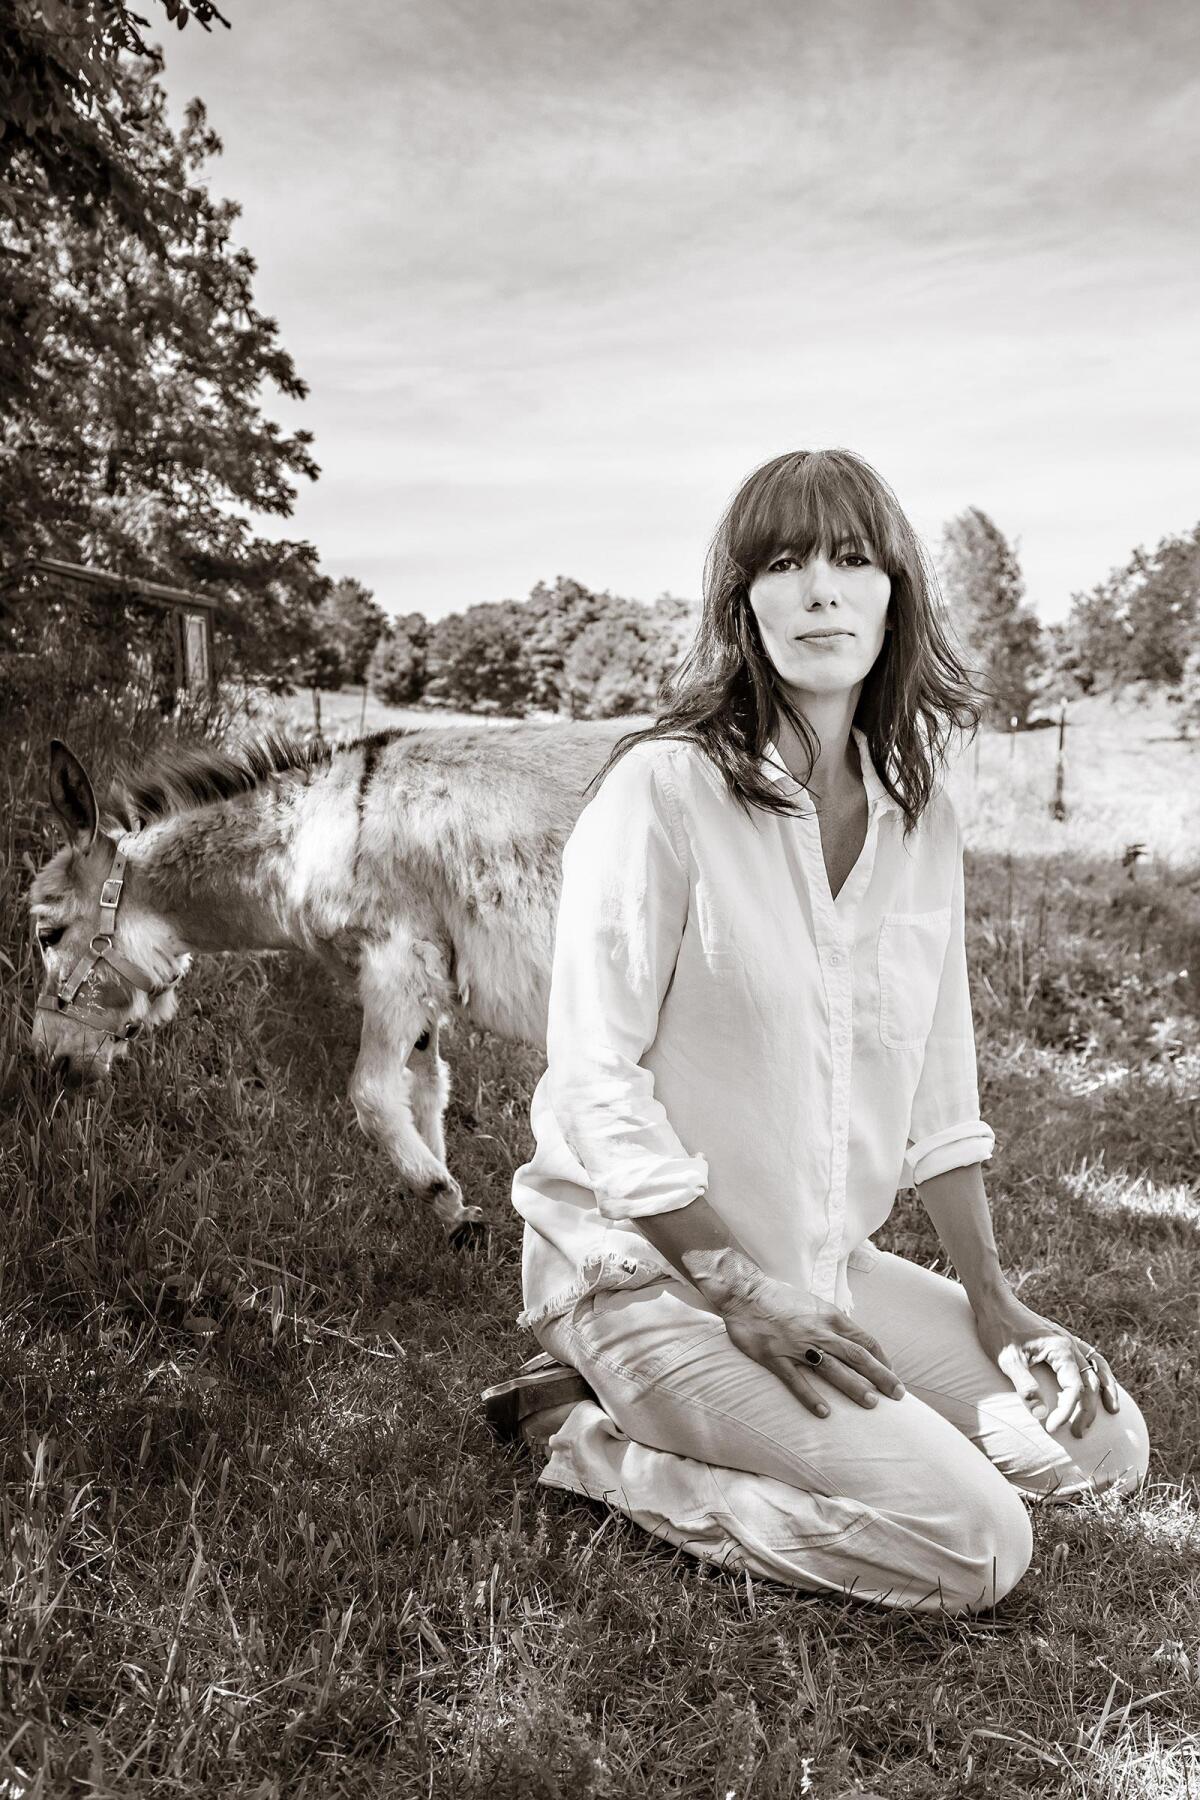 A woman in white sits in a field in front of a grazing animal.